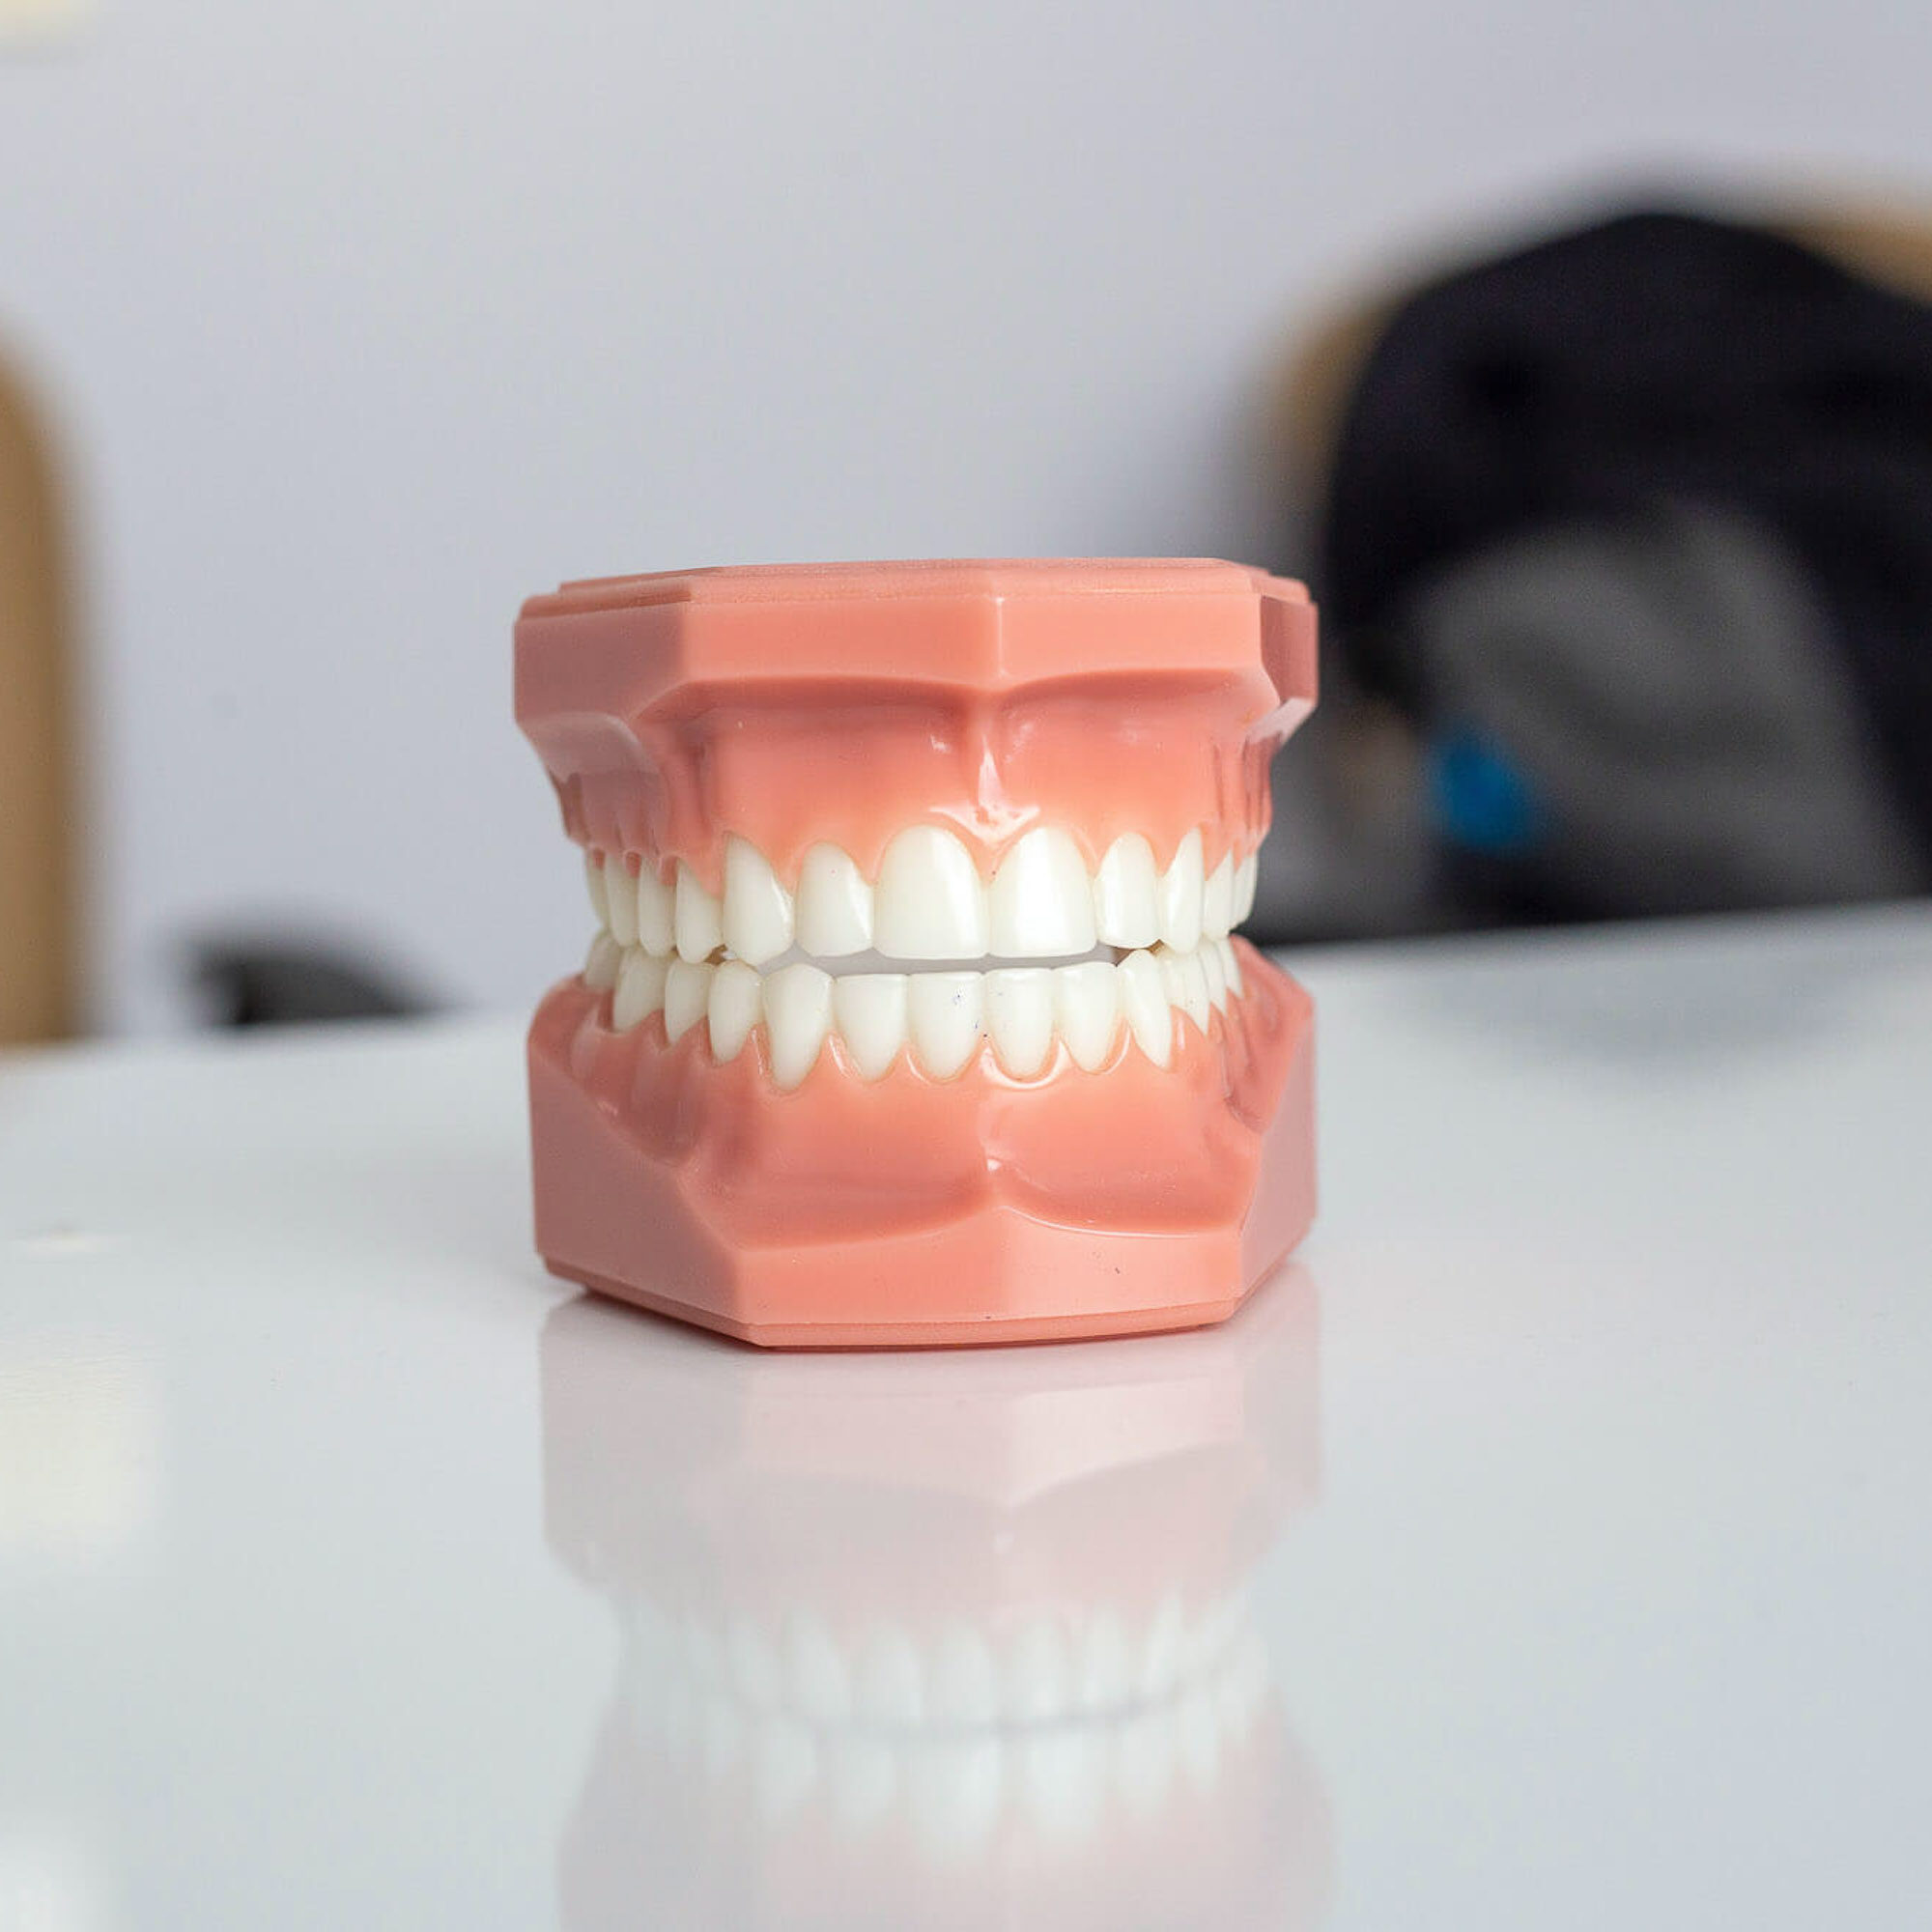 dental model of jaw and teeth